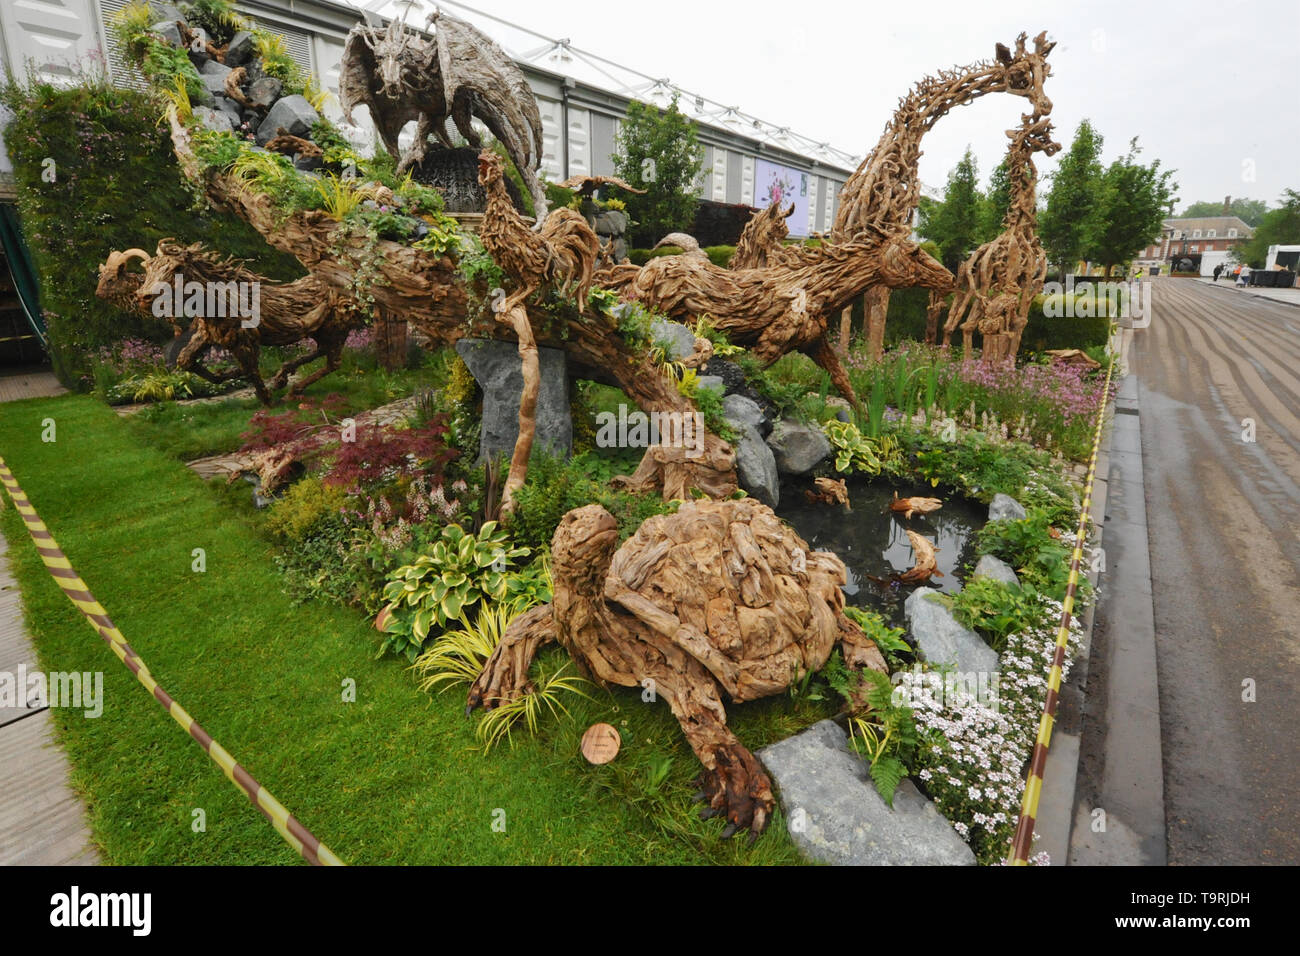 Rustic animal sculptures on display at the 2019 RHS Chelsea Flower Show which opened today in the 11-acre grounds of the Royal Hospital Chelsea, London, United Kingdom - 20 May 2019  Held since 1913, the five day event is the most prestigious flower and garden show in the United Kingdom, and perhaps in the world, and attracts around 168,000 visitors each year.  There are 26 themed gardens on display at this year’s show as well as over 100 plant displays in the Great Pavilion. New plants are often launched at the show and the popularity of older varieties revived, it is, in effect, the garden d Stock Photo